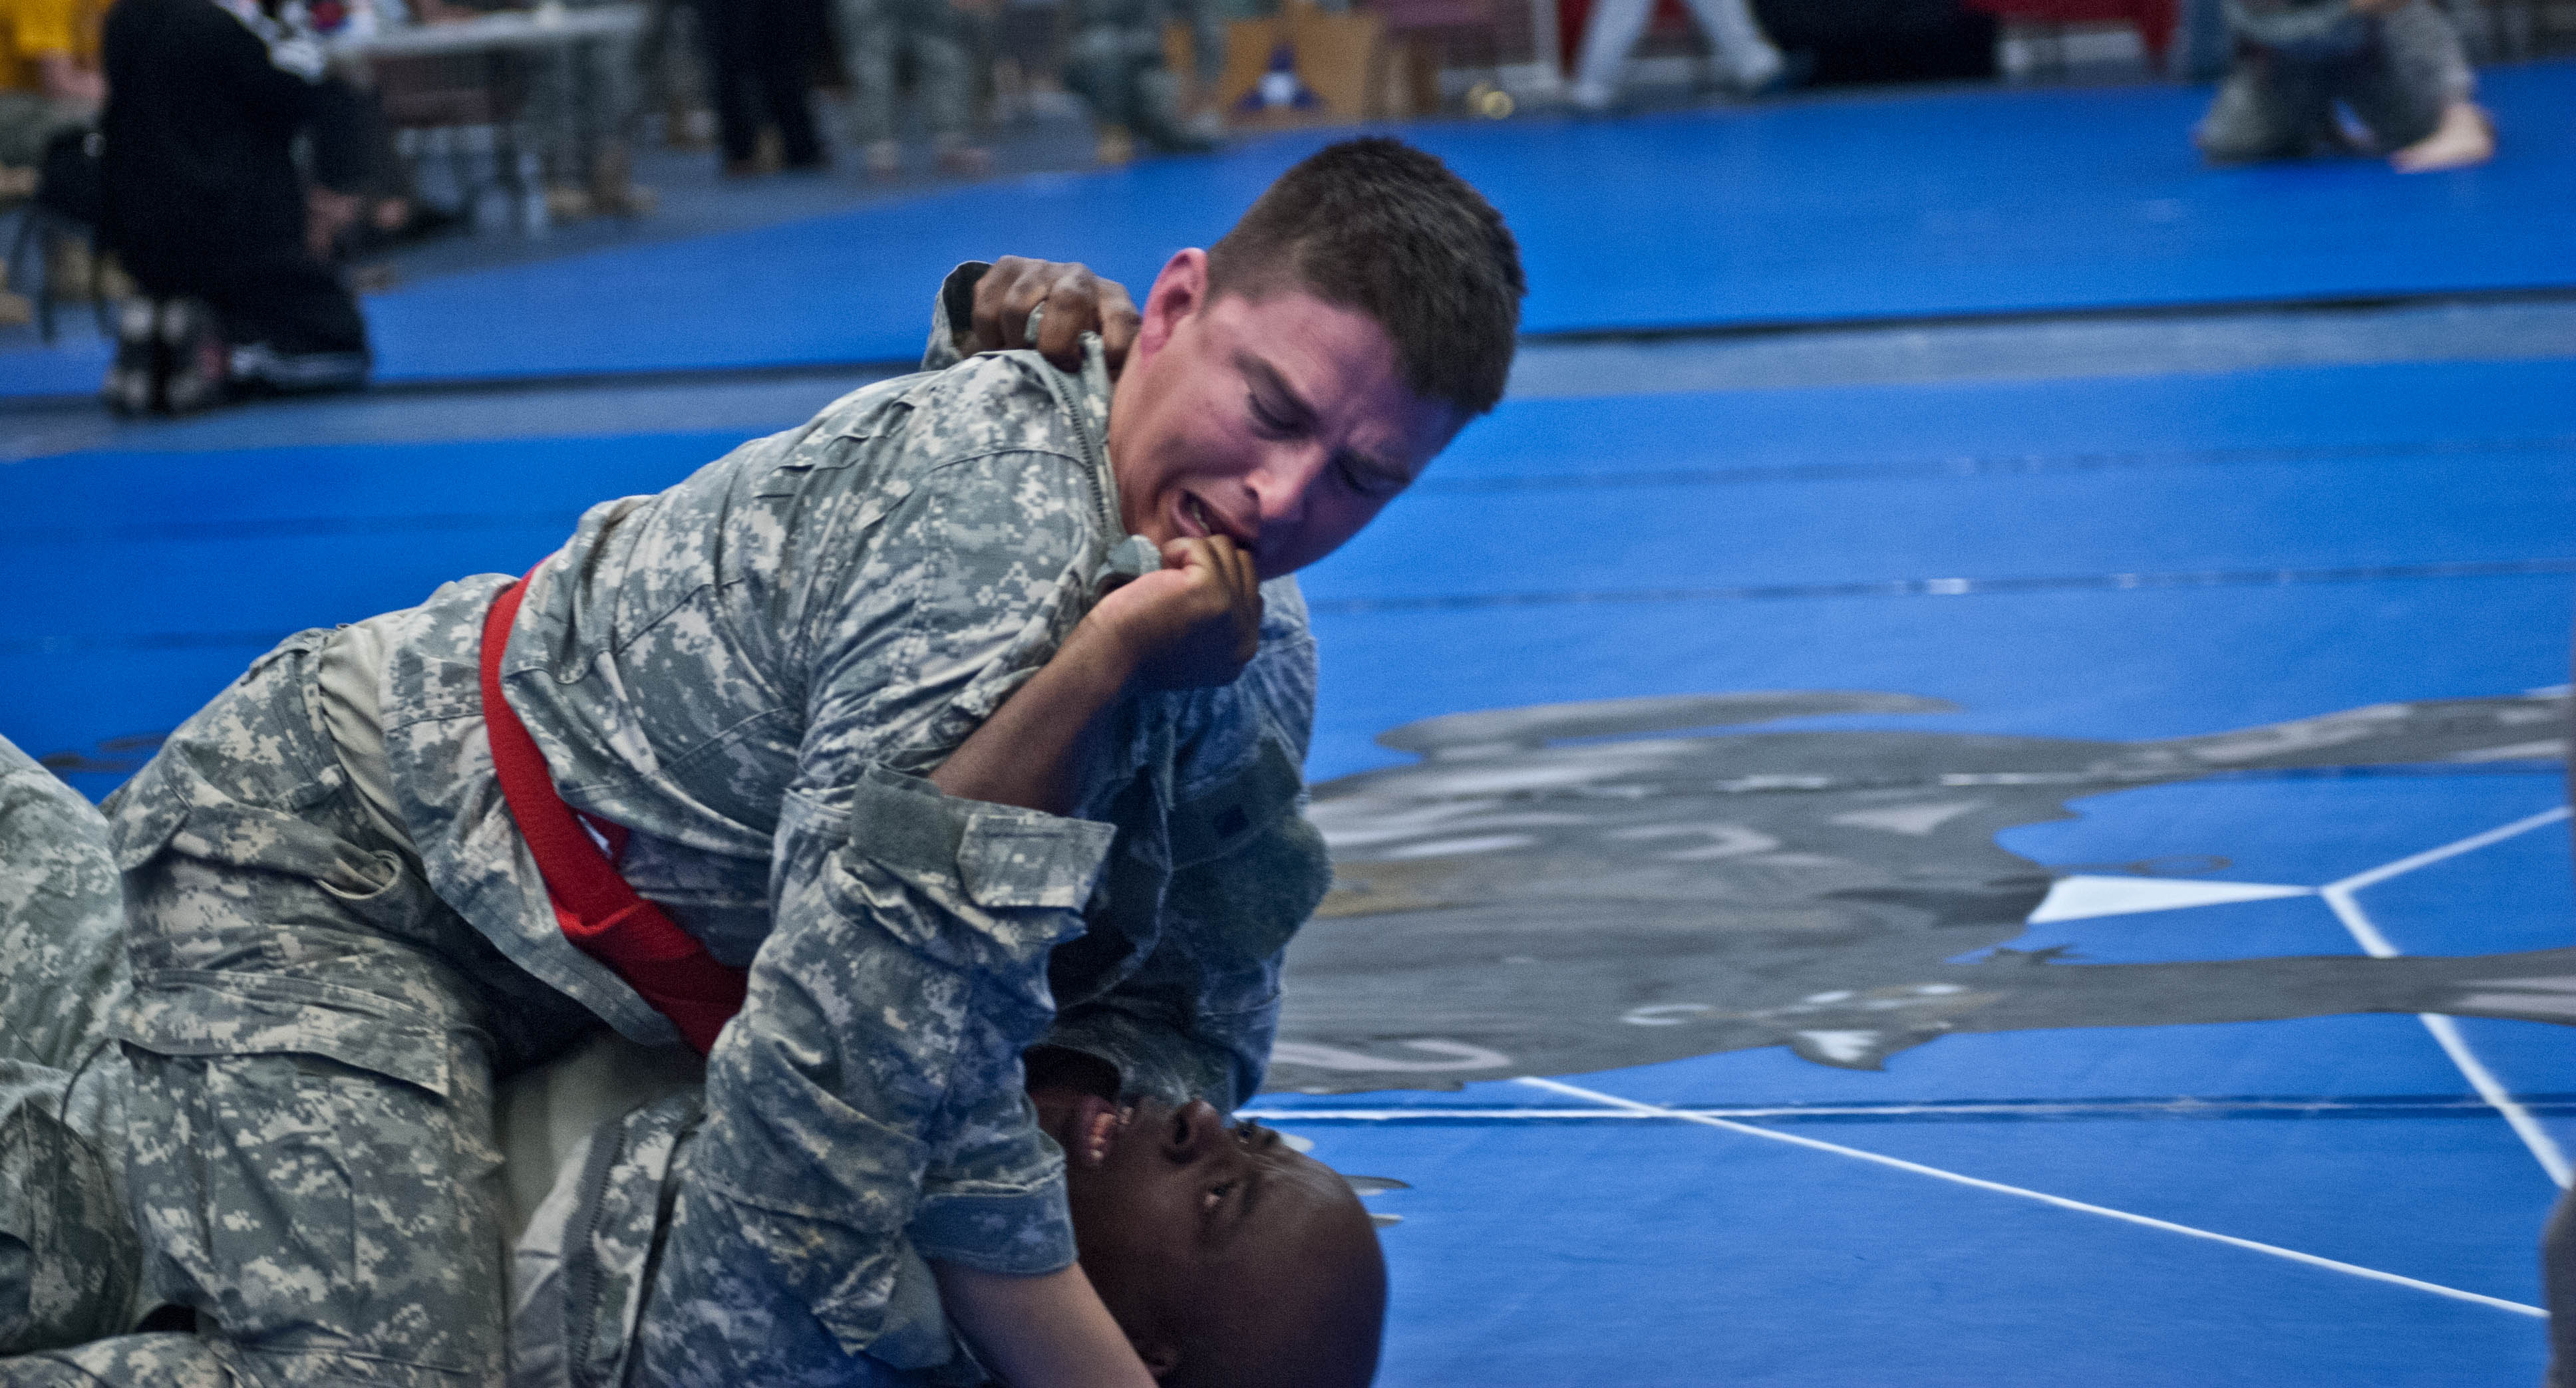 20120214-A-RE761-001: Sgt. 1st Class Jonathon D. Galindo (top), a civil affairs team sergeant assigned to Alpha Company, 81st Civil Affairs Battalion, 85th Civil Affairs Brigade, attempts to apply a choke hold on Sgt. Timothy M. Hardy, a Soldier assigned to Alpha Company, 1st Battalion, 5th Calvary Regiment, 2nd Brigade Combat Team, 1st Calvary Division, during the 2012 Fort Hood Combatives Championship preliminaries Feb. 14 at the Abrams Physical Fitness Center on base. (Photo by Staff Sgt. Michael J. Dator, 85th Civil Affairs Brigade Public Affairs)